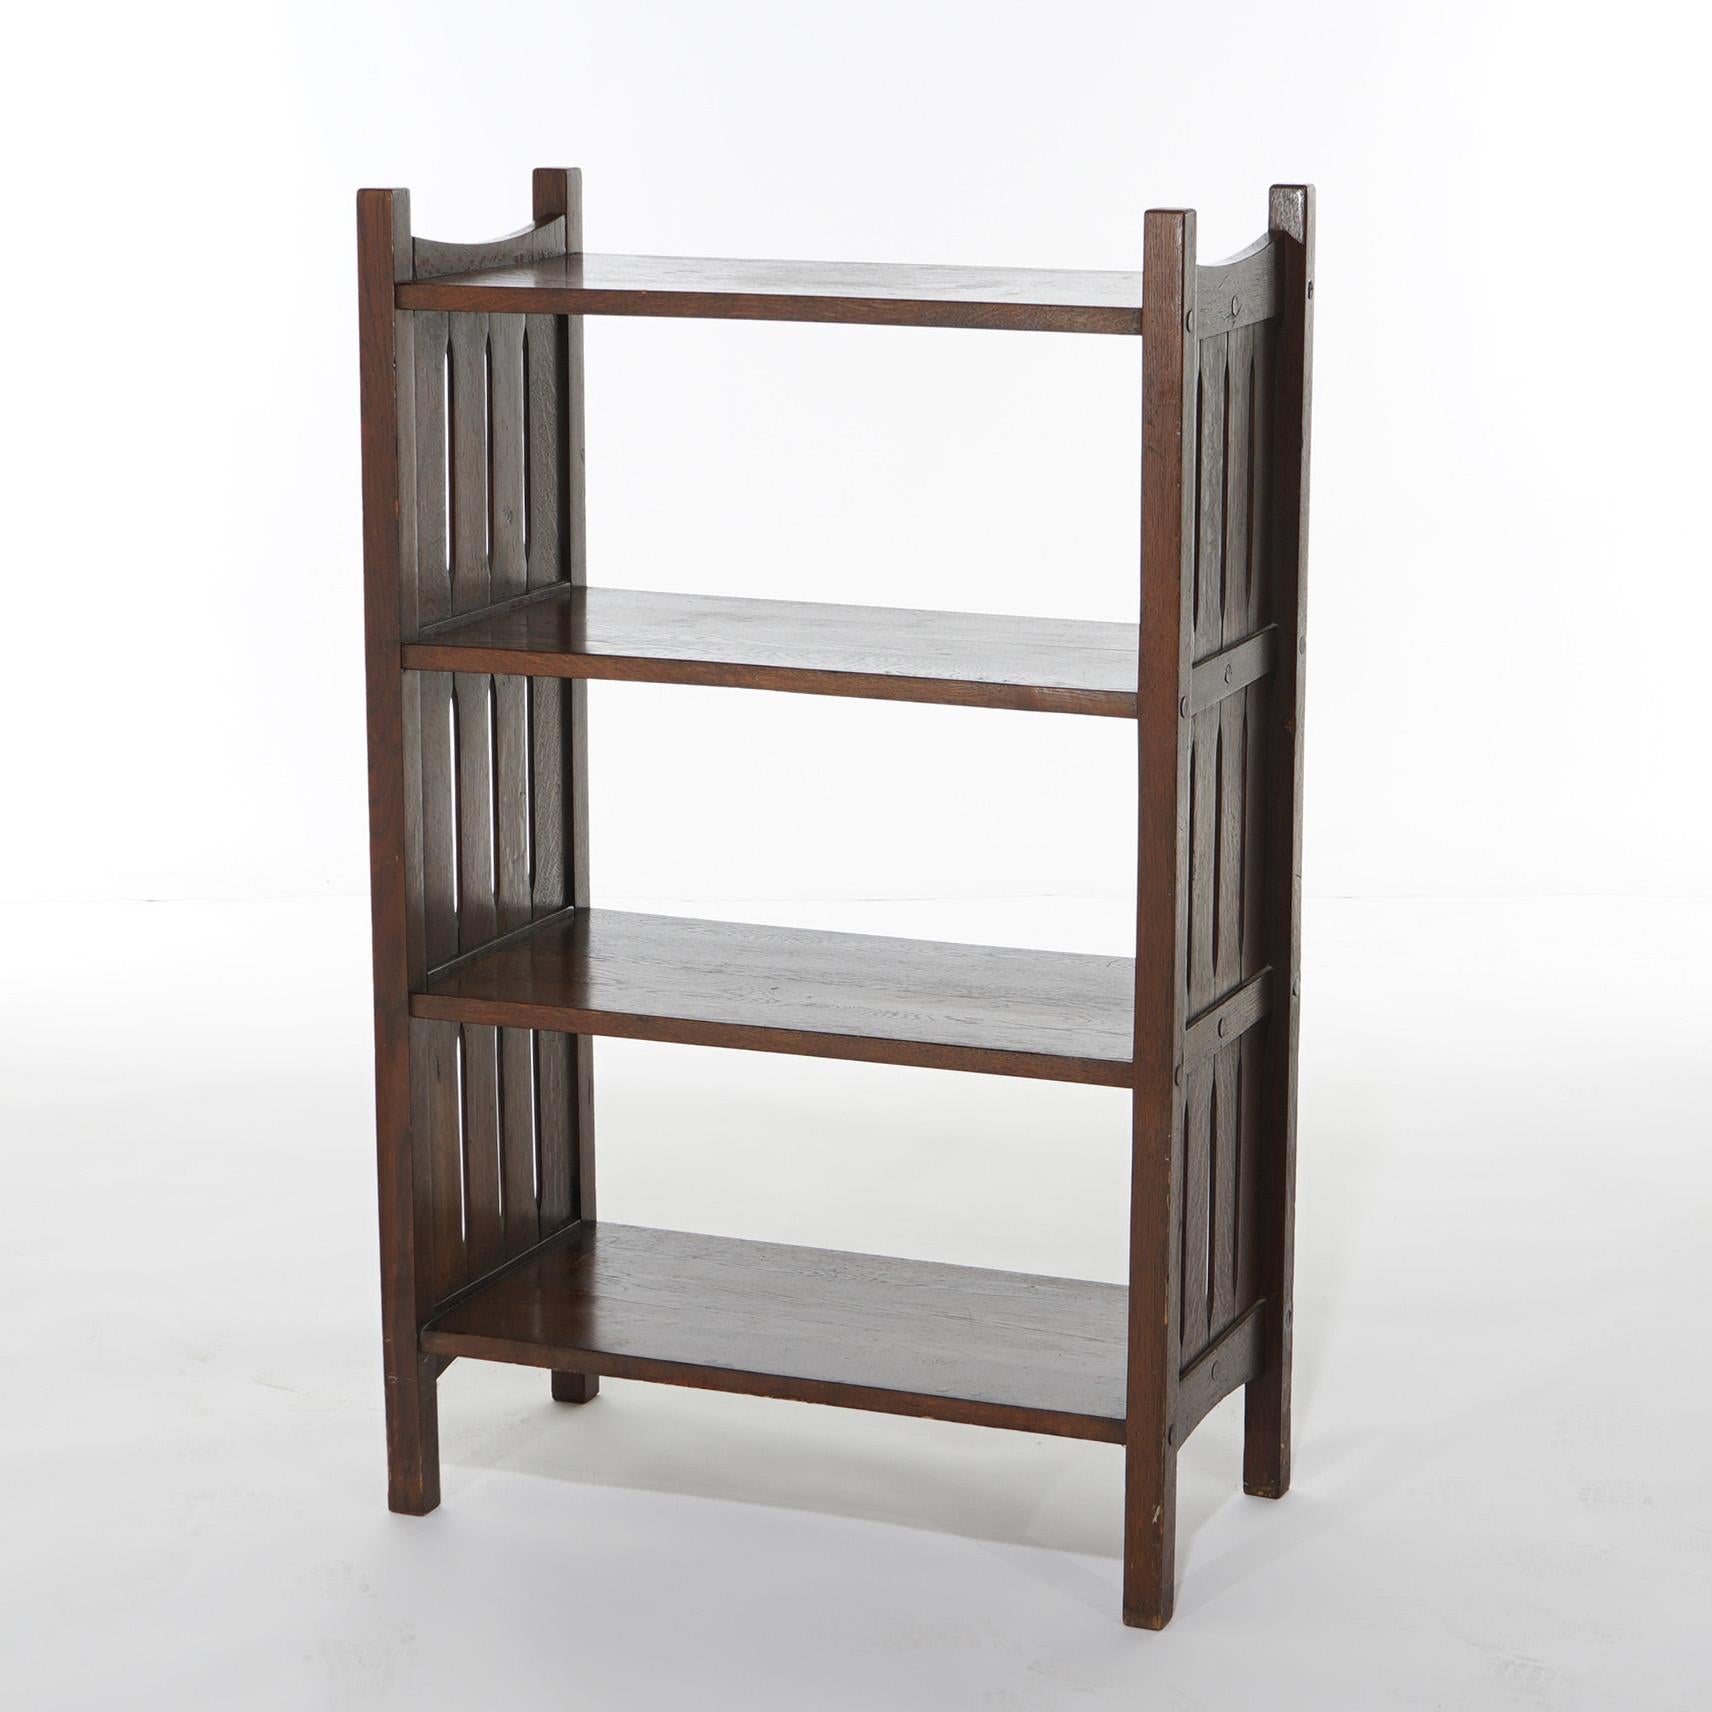 An antique Arts and Crafts bookshelf in the manner of Stickley offers oak construction with four shelves and stylized slat sides, c1910

Measures - 44.5